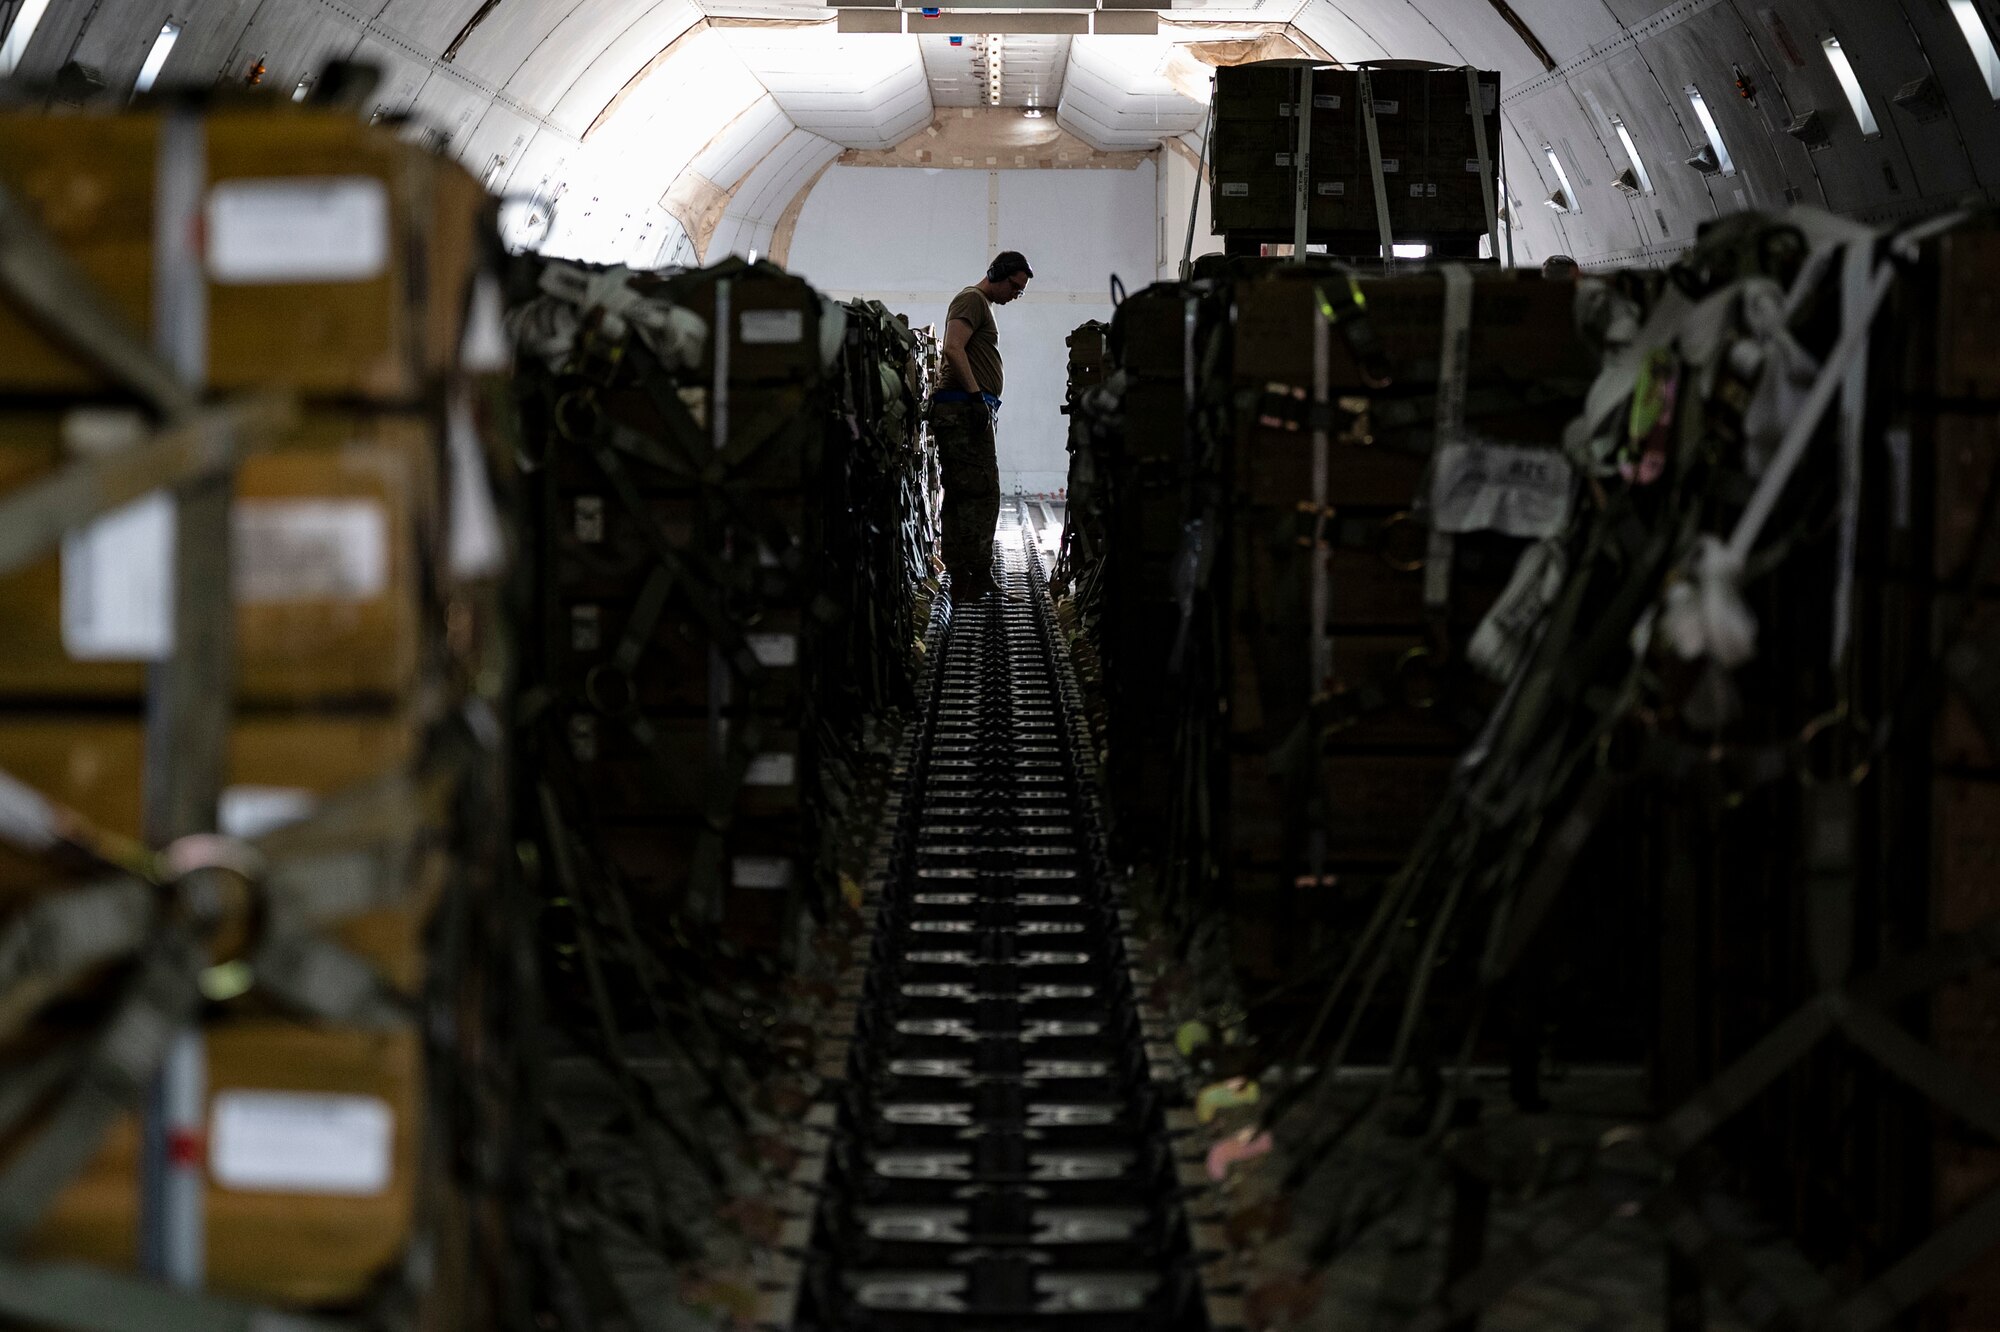 Senior Airman Nicholas Surdukowski, 436th Aerial Port Squadron ramp services specialist, assists in loading ammunition onto a commercial plane bound for Ukraine during a security assistance mission at Dover Air Force Base, Delaware, July 21, 2022. The Department of Defense is providing Ukraine with critical capabilities to defend against Russian aggression under the Ukraine Security Assistance initiative. (U.S. Air Force photo by Senior Airman Faith Schaefer)